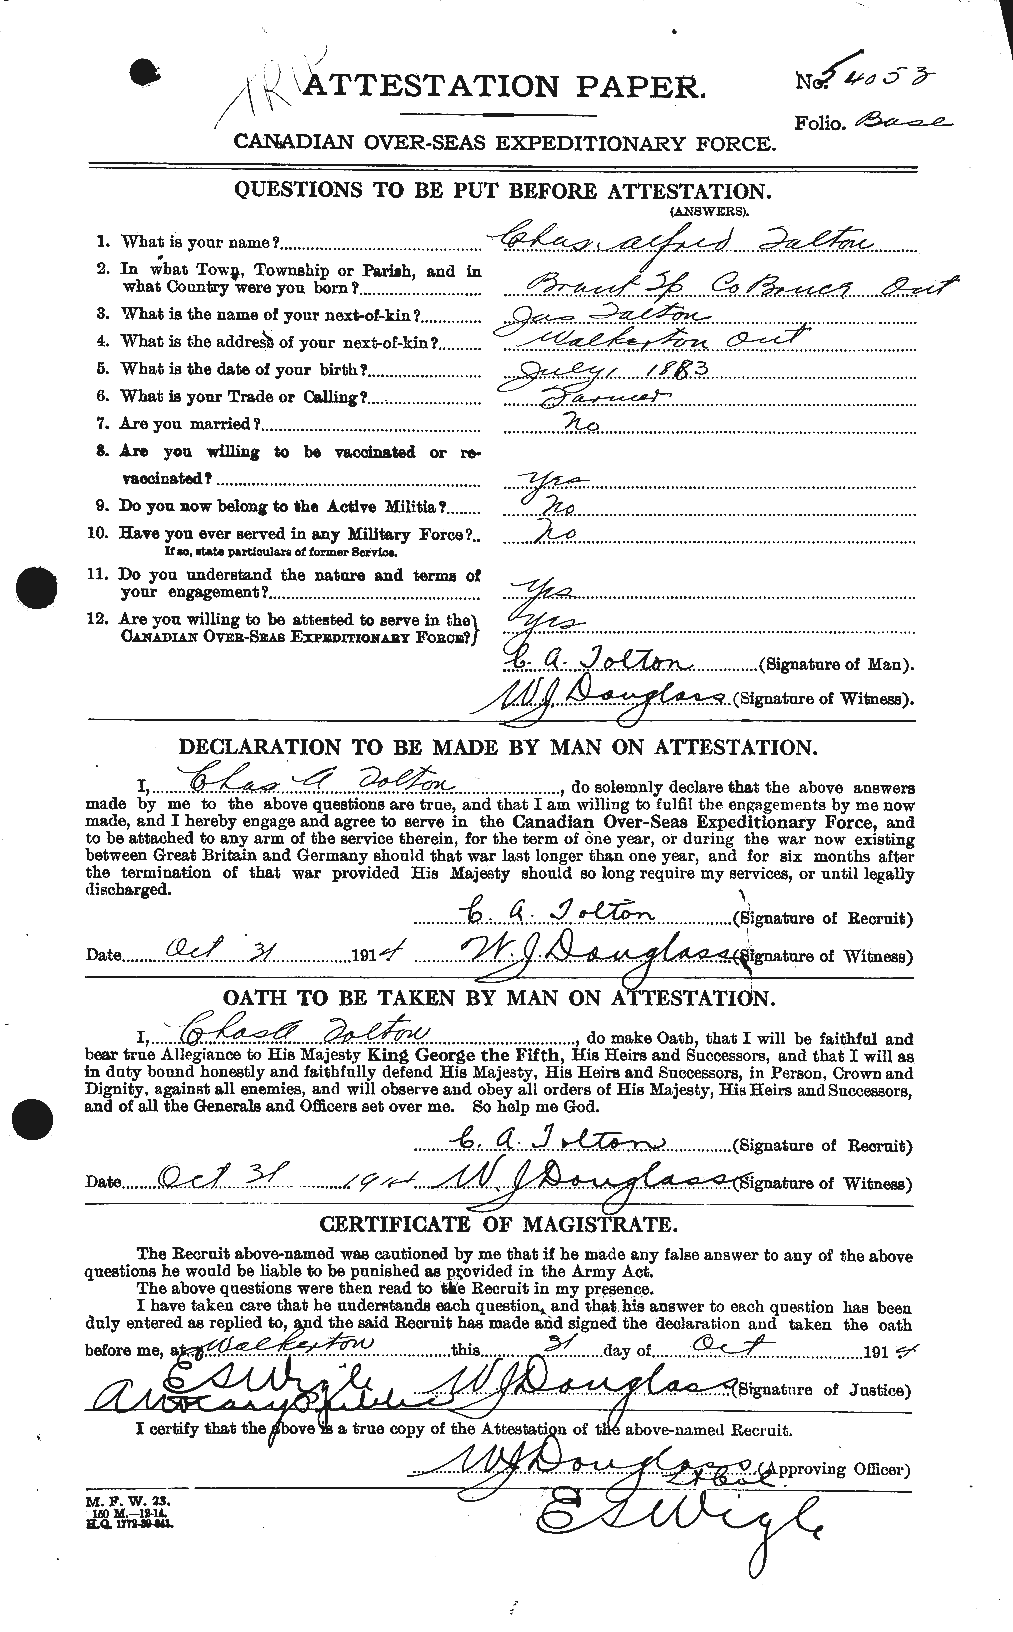 Personnel Records of the First World War - CEF 643090a